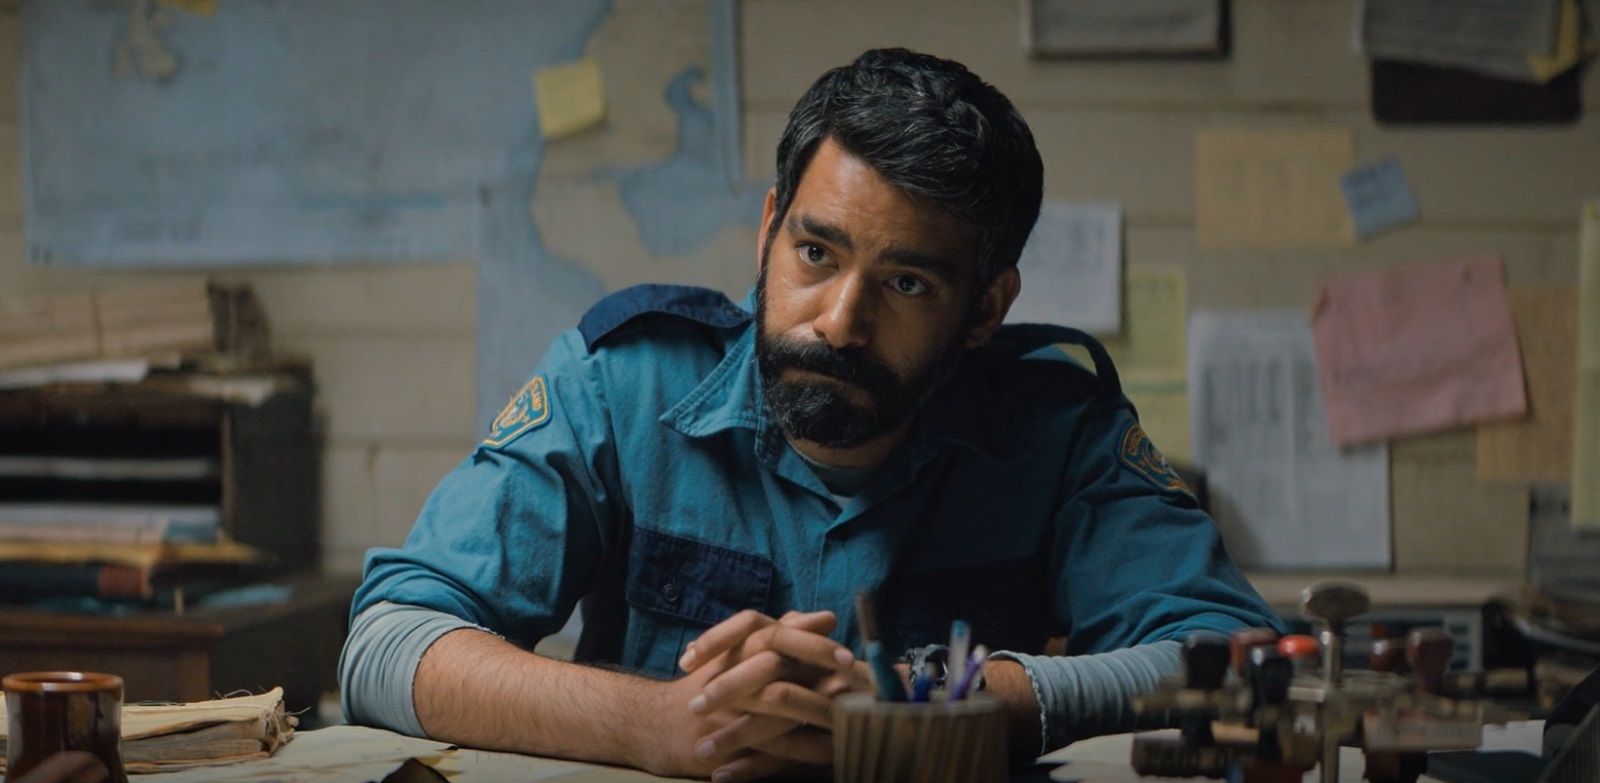 Clint Eastwood Inspired Rahul Kohli’s Character in Midnight Mass